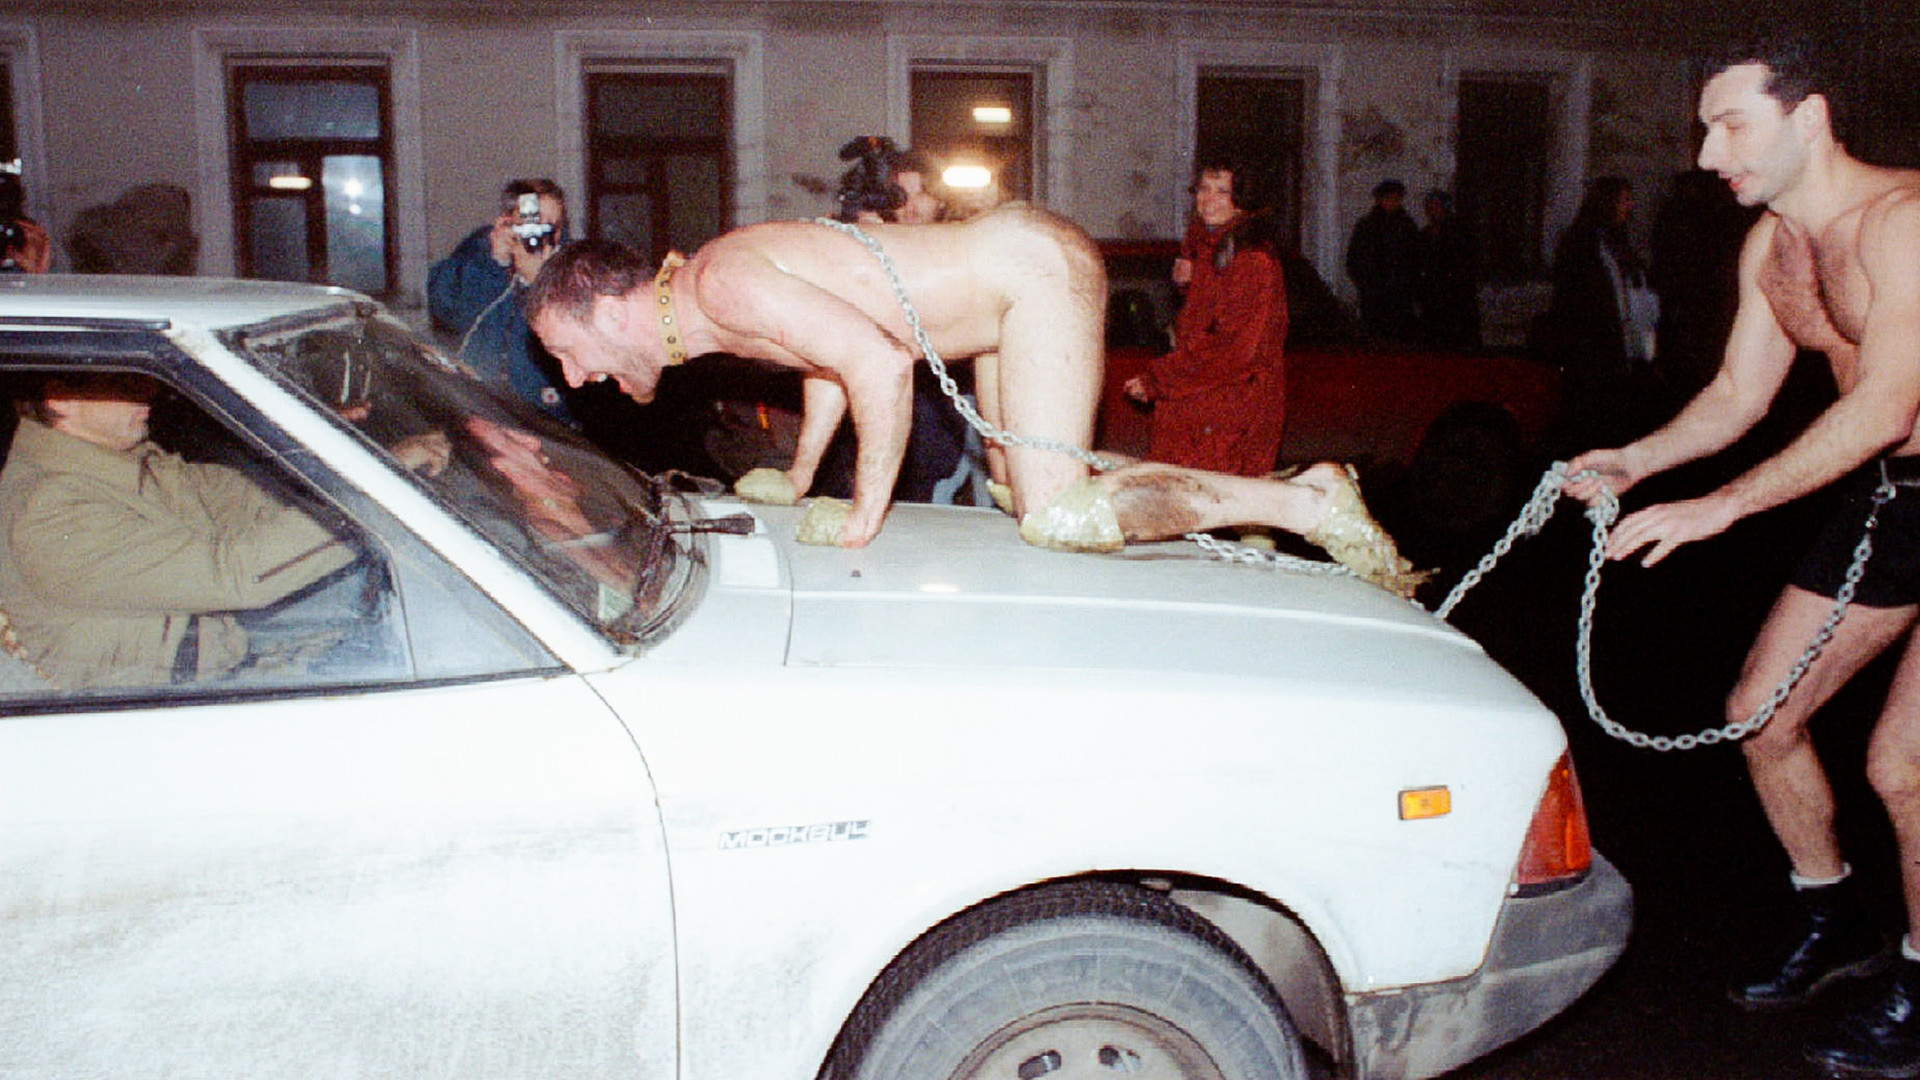 Russian artist Oleg Kulik imitating a dog jumps on the car of a scared Muscovite as Alexander Brener, representing his owner, tries to hold him back